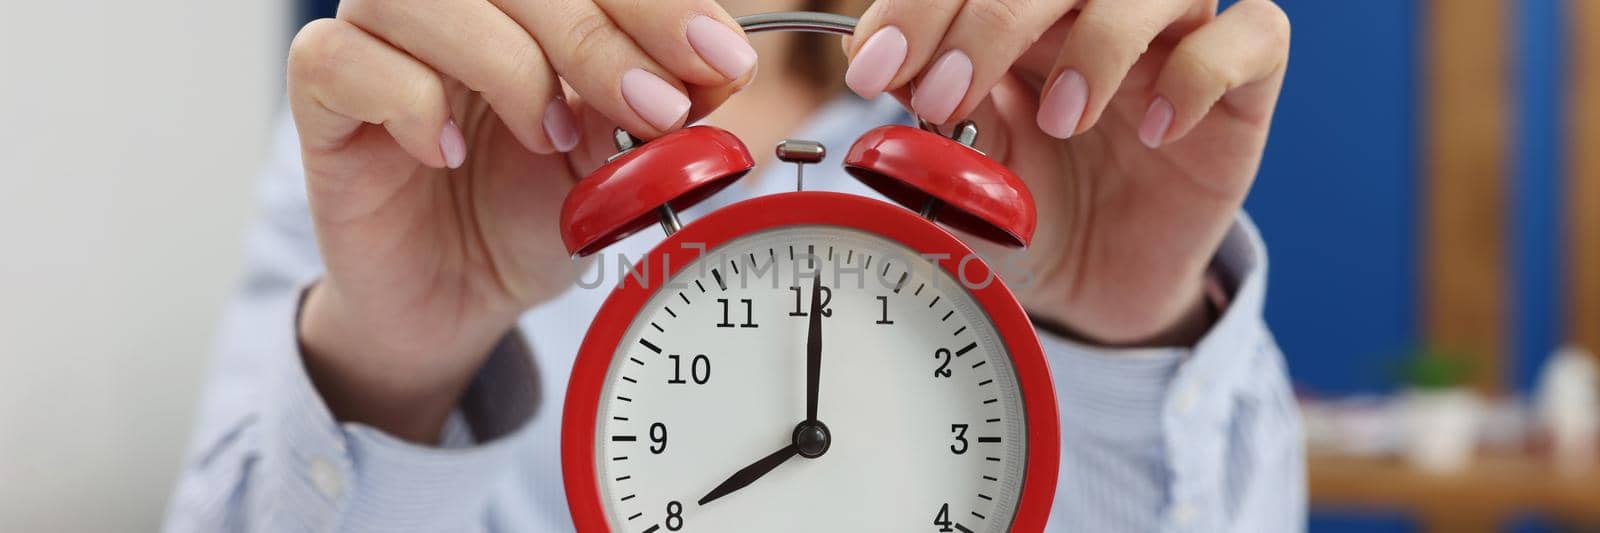 Woman holding a red alarm clock, close-up, blurry. Concept of day planning, meeting deadlines, productive morning